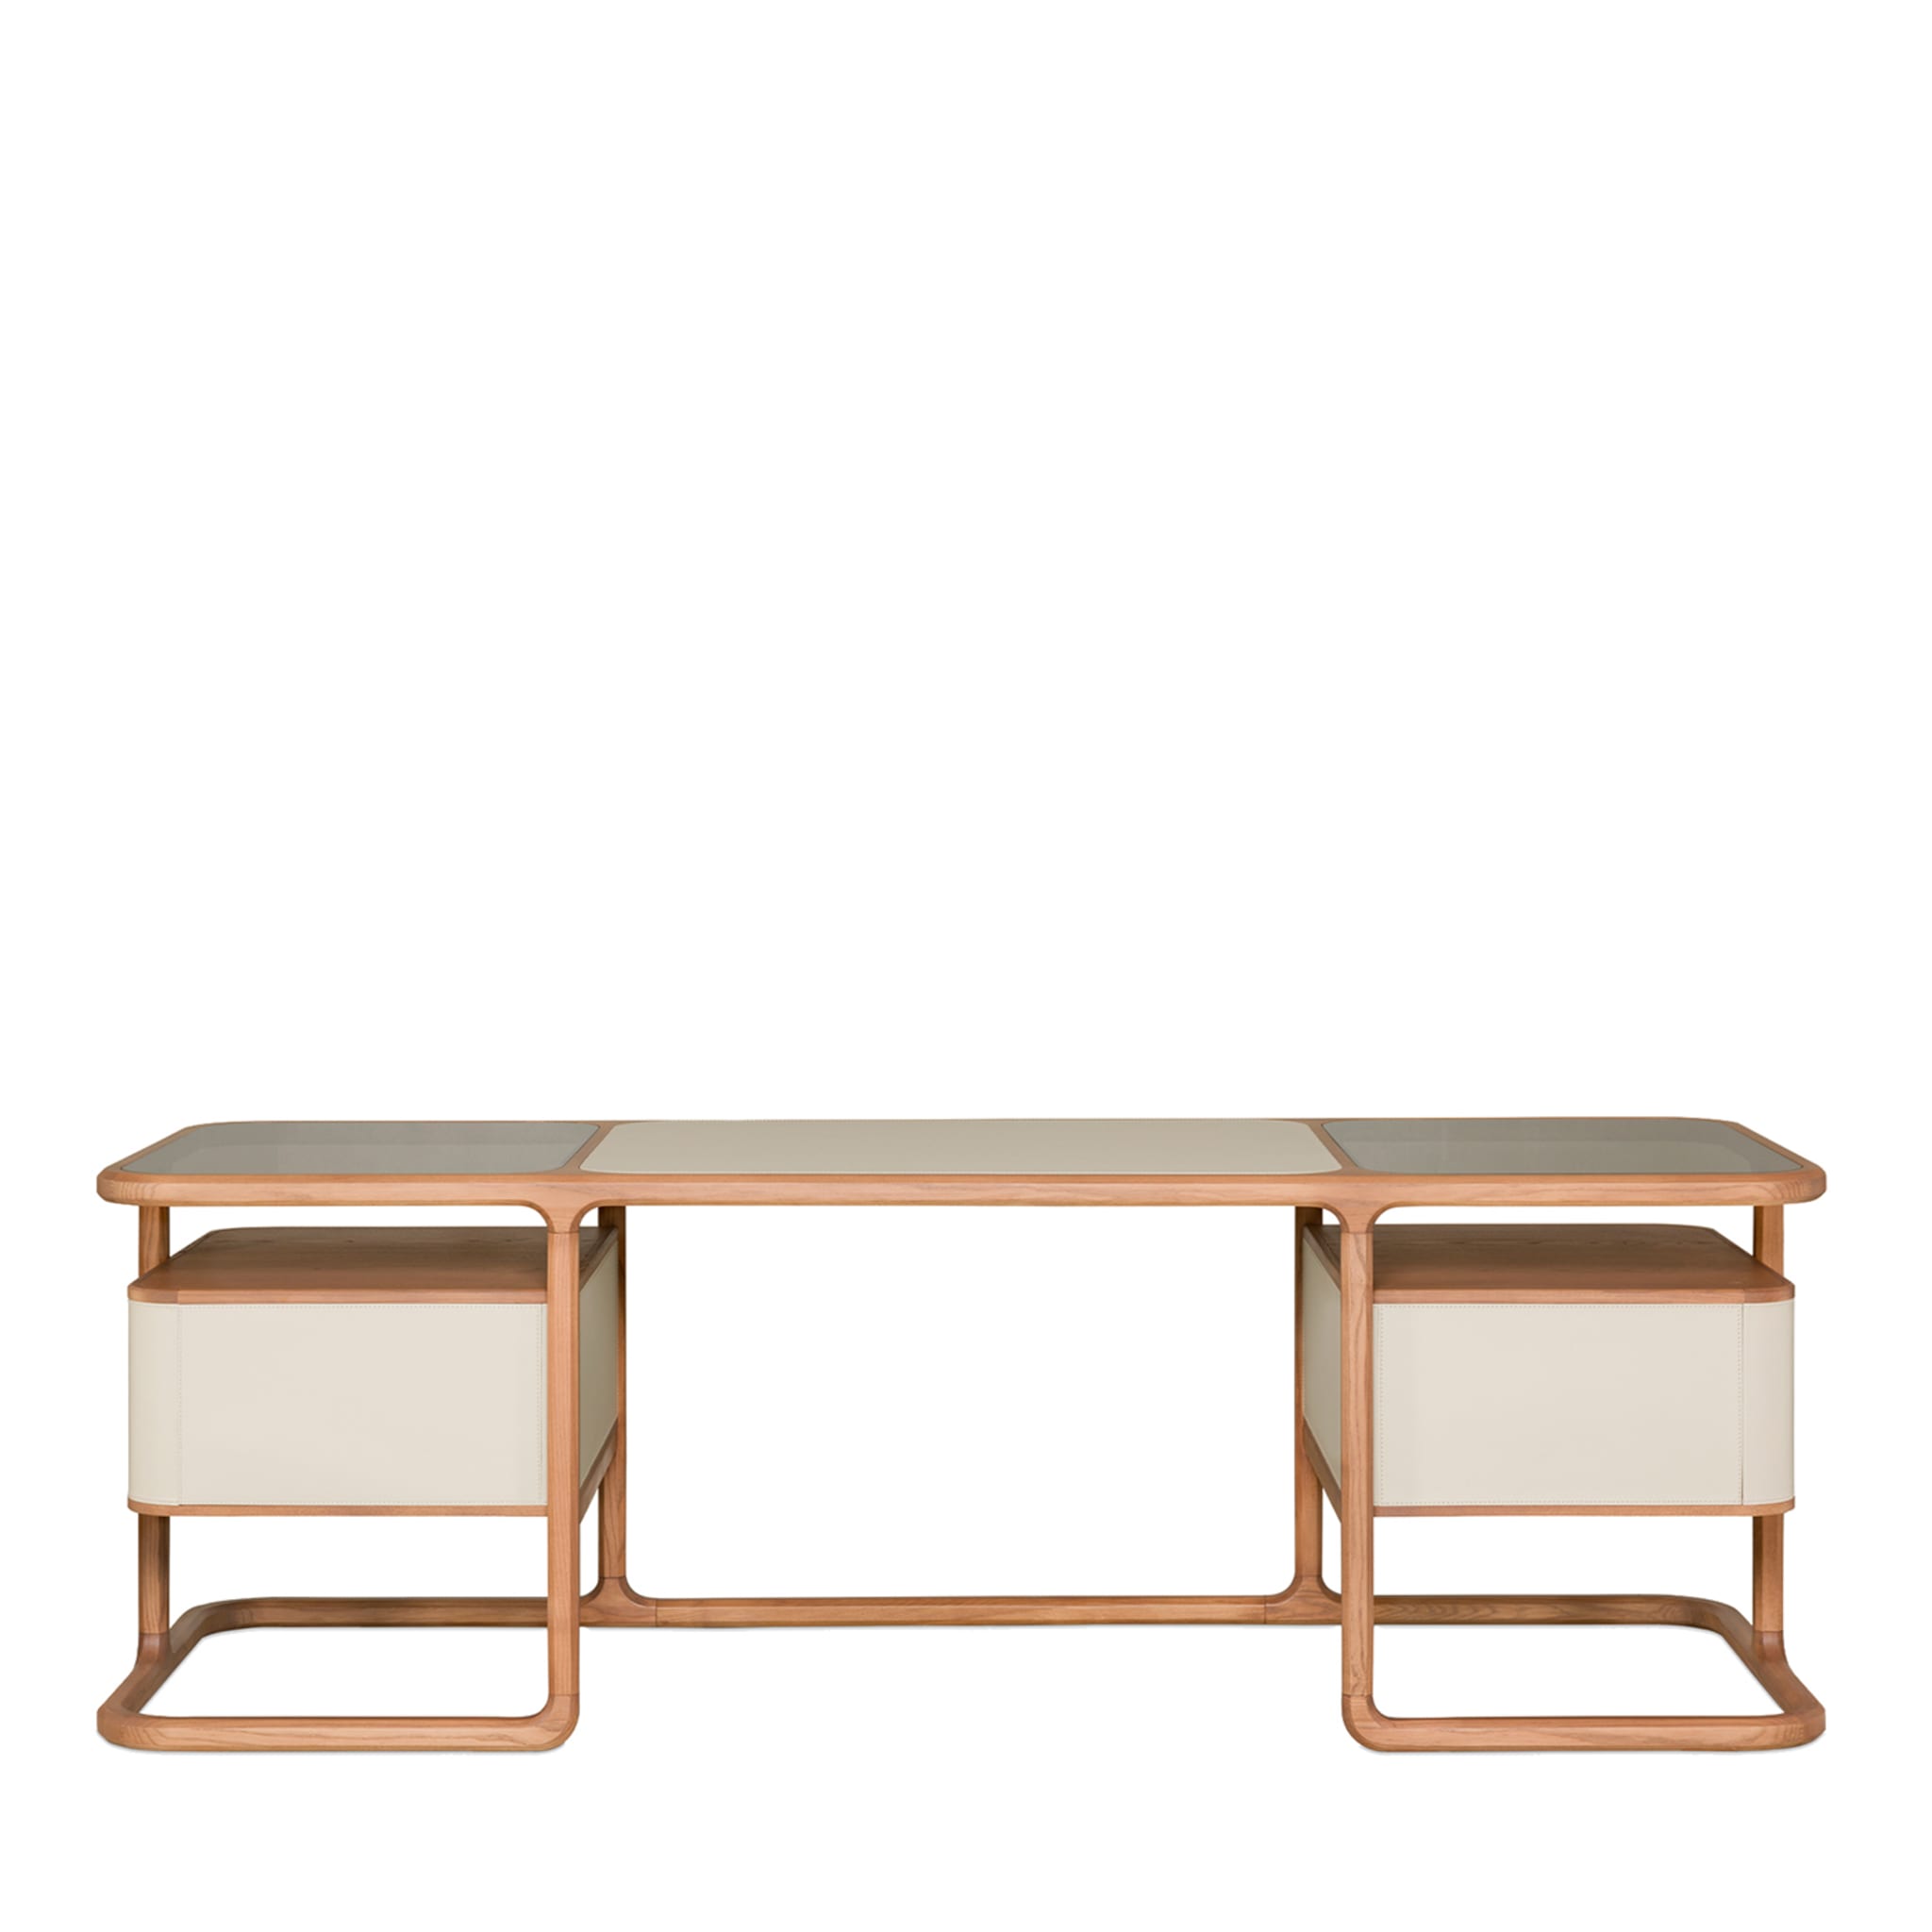 Isabel 2-Sided Desk By Libero Rutilo - Main view